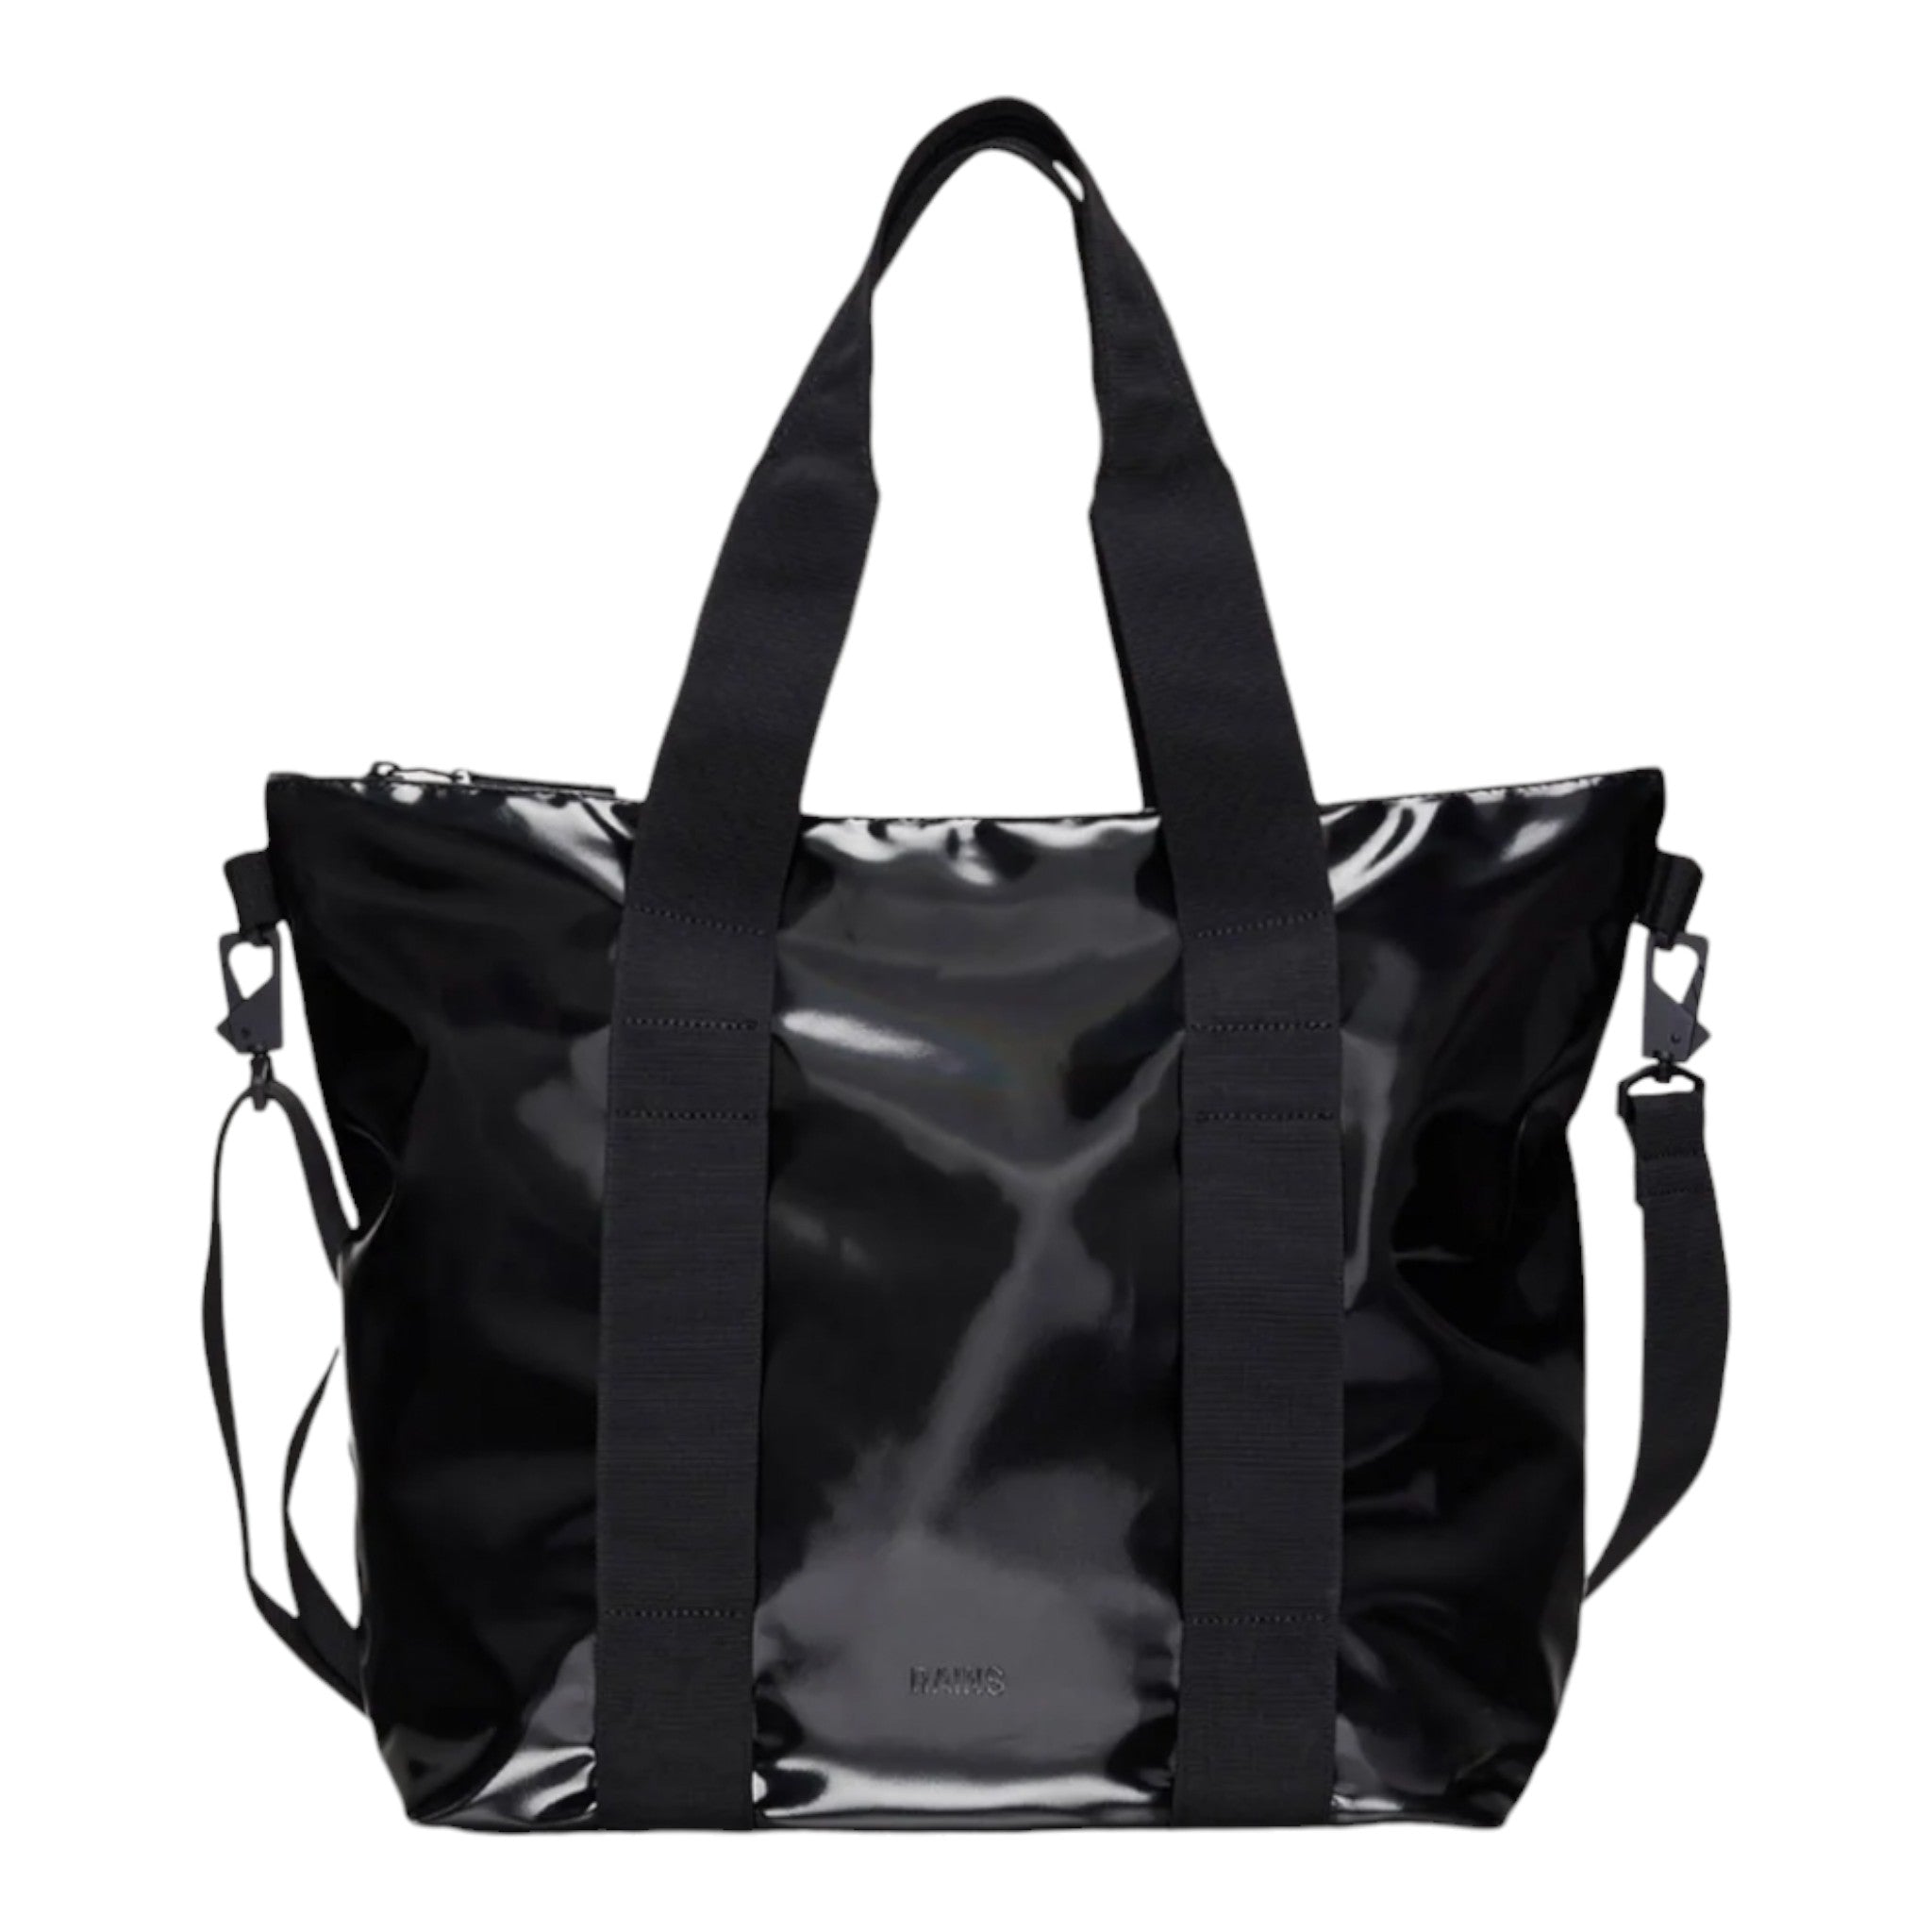 small black tote bag with regular handles + an adjustable shoulder strap featuring a slick and shiny look to the fabric